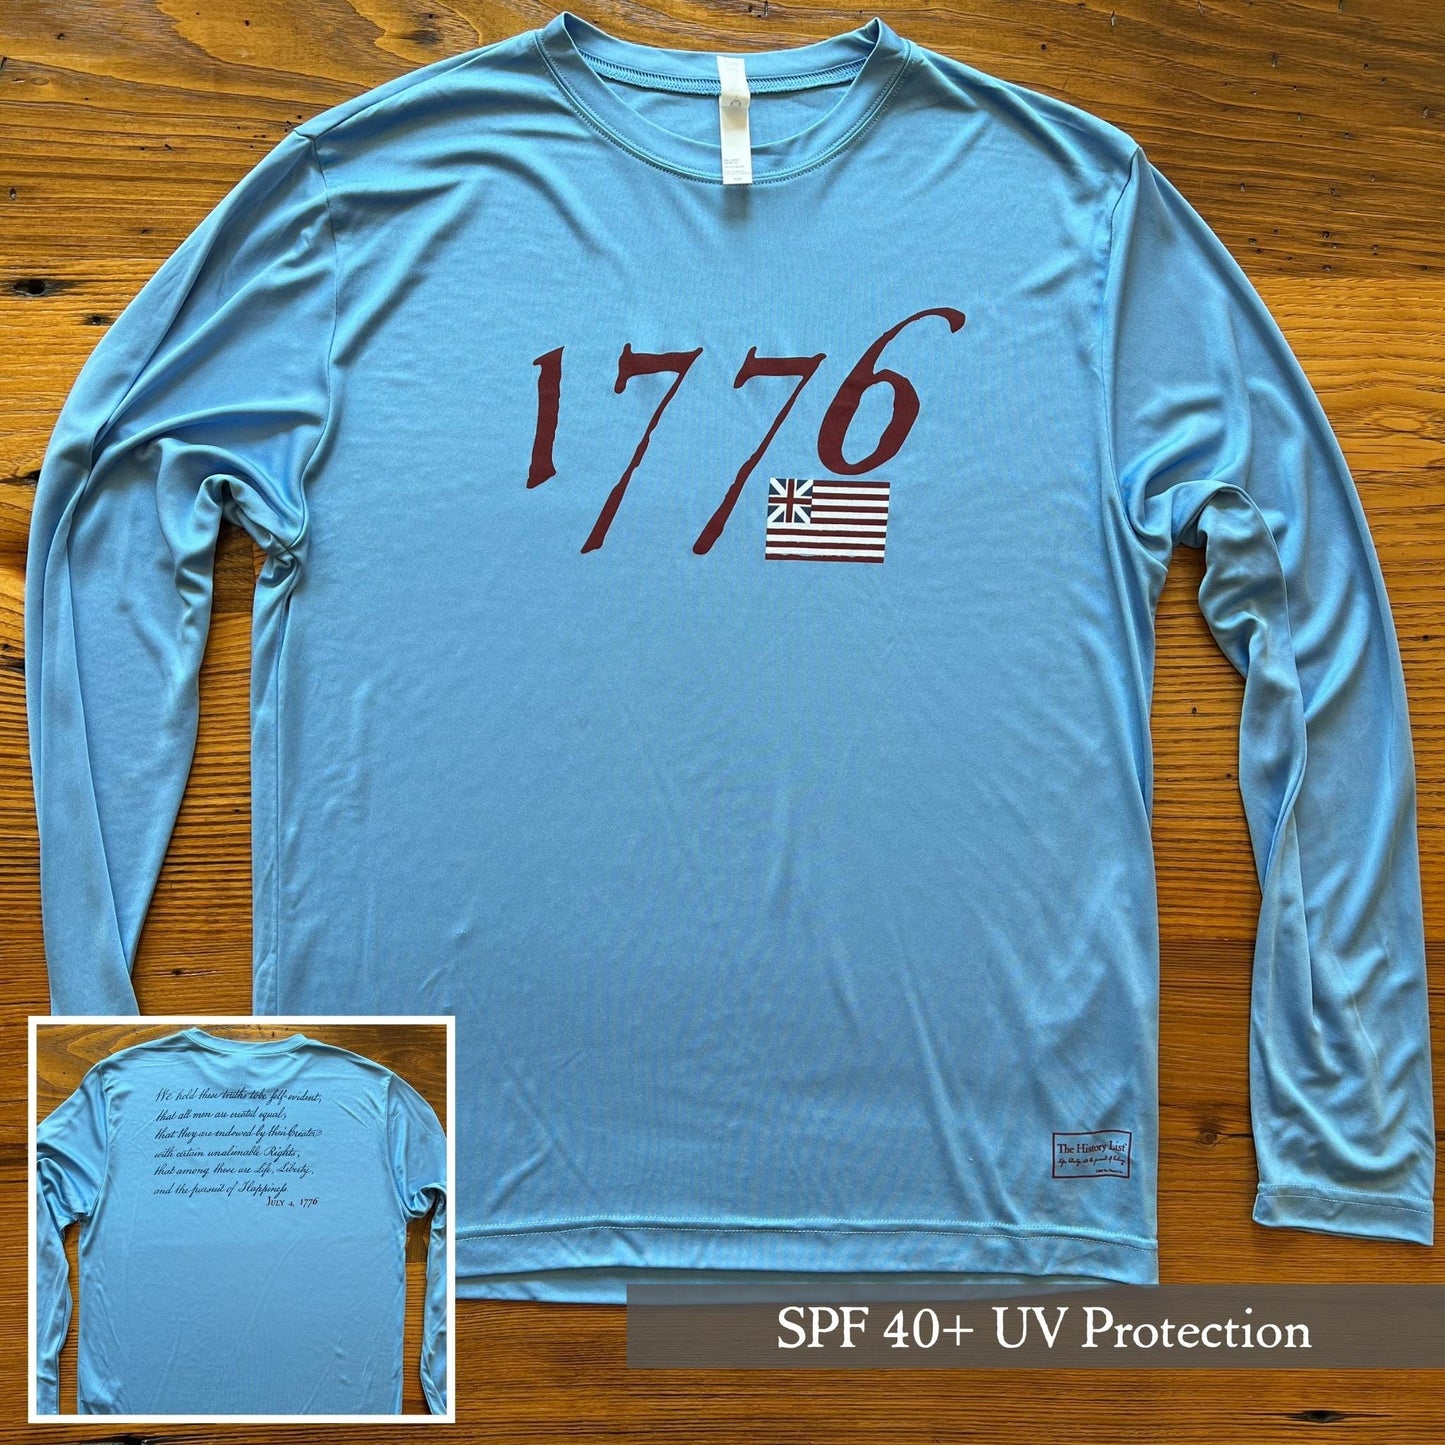 "We hold these truths - July 4, 1776” on moisture-wicking 100% polyester interlock with SPF 40+ UV protection - Long-sleeved from The History List store